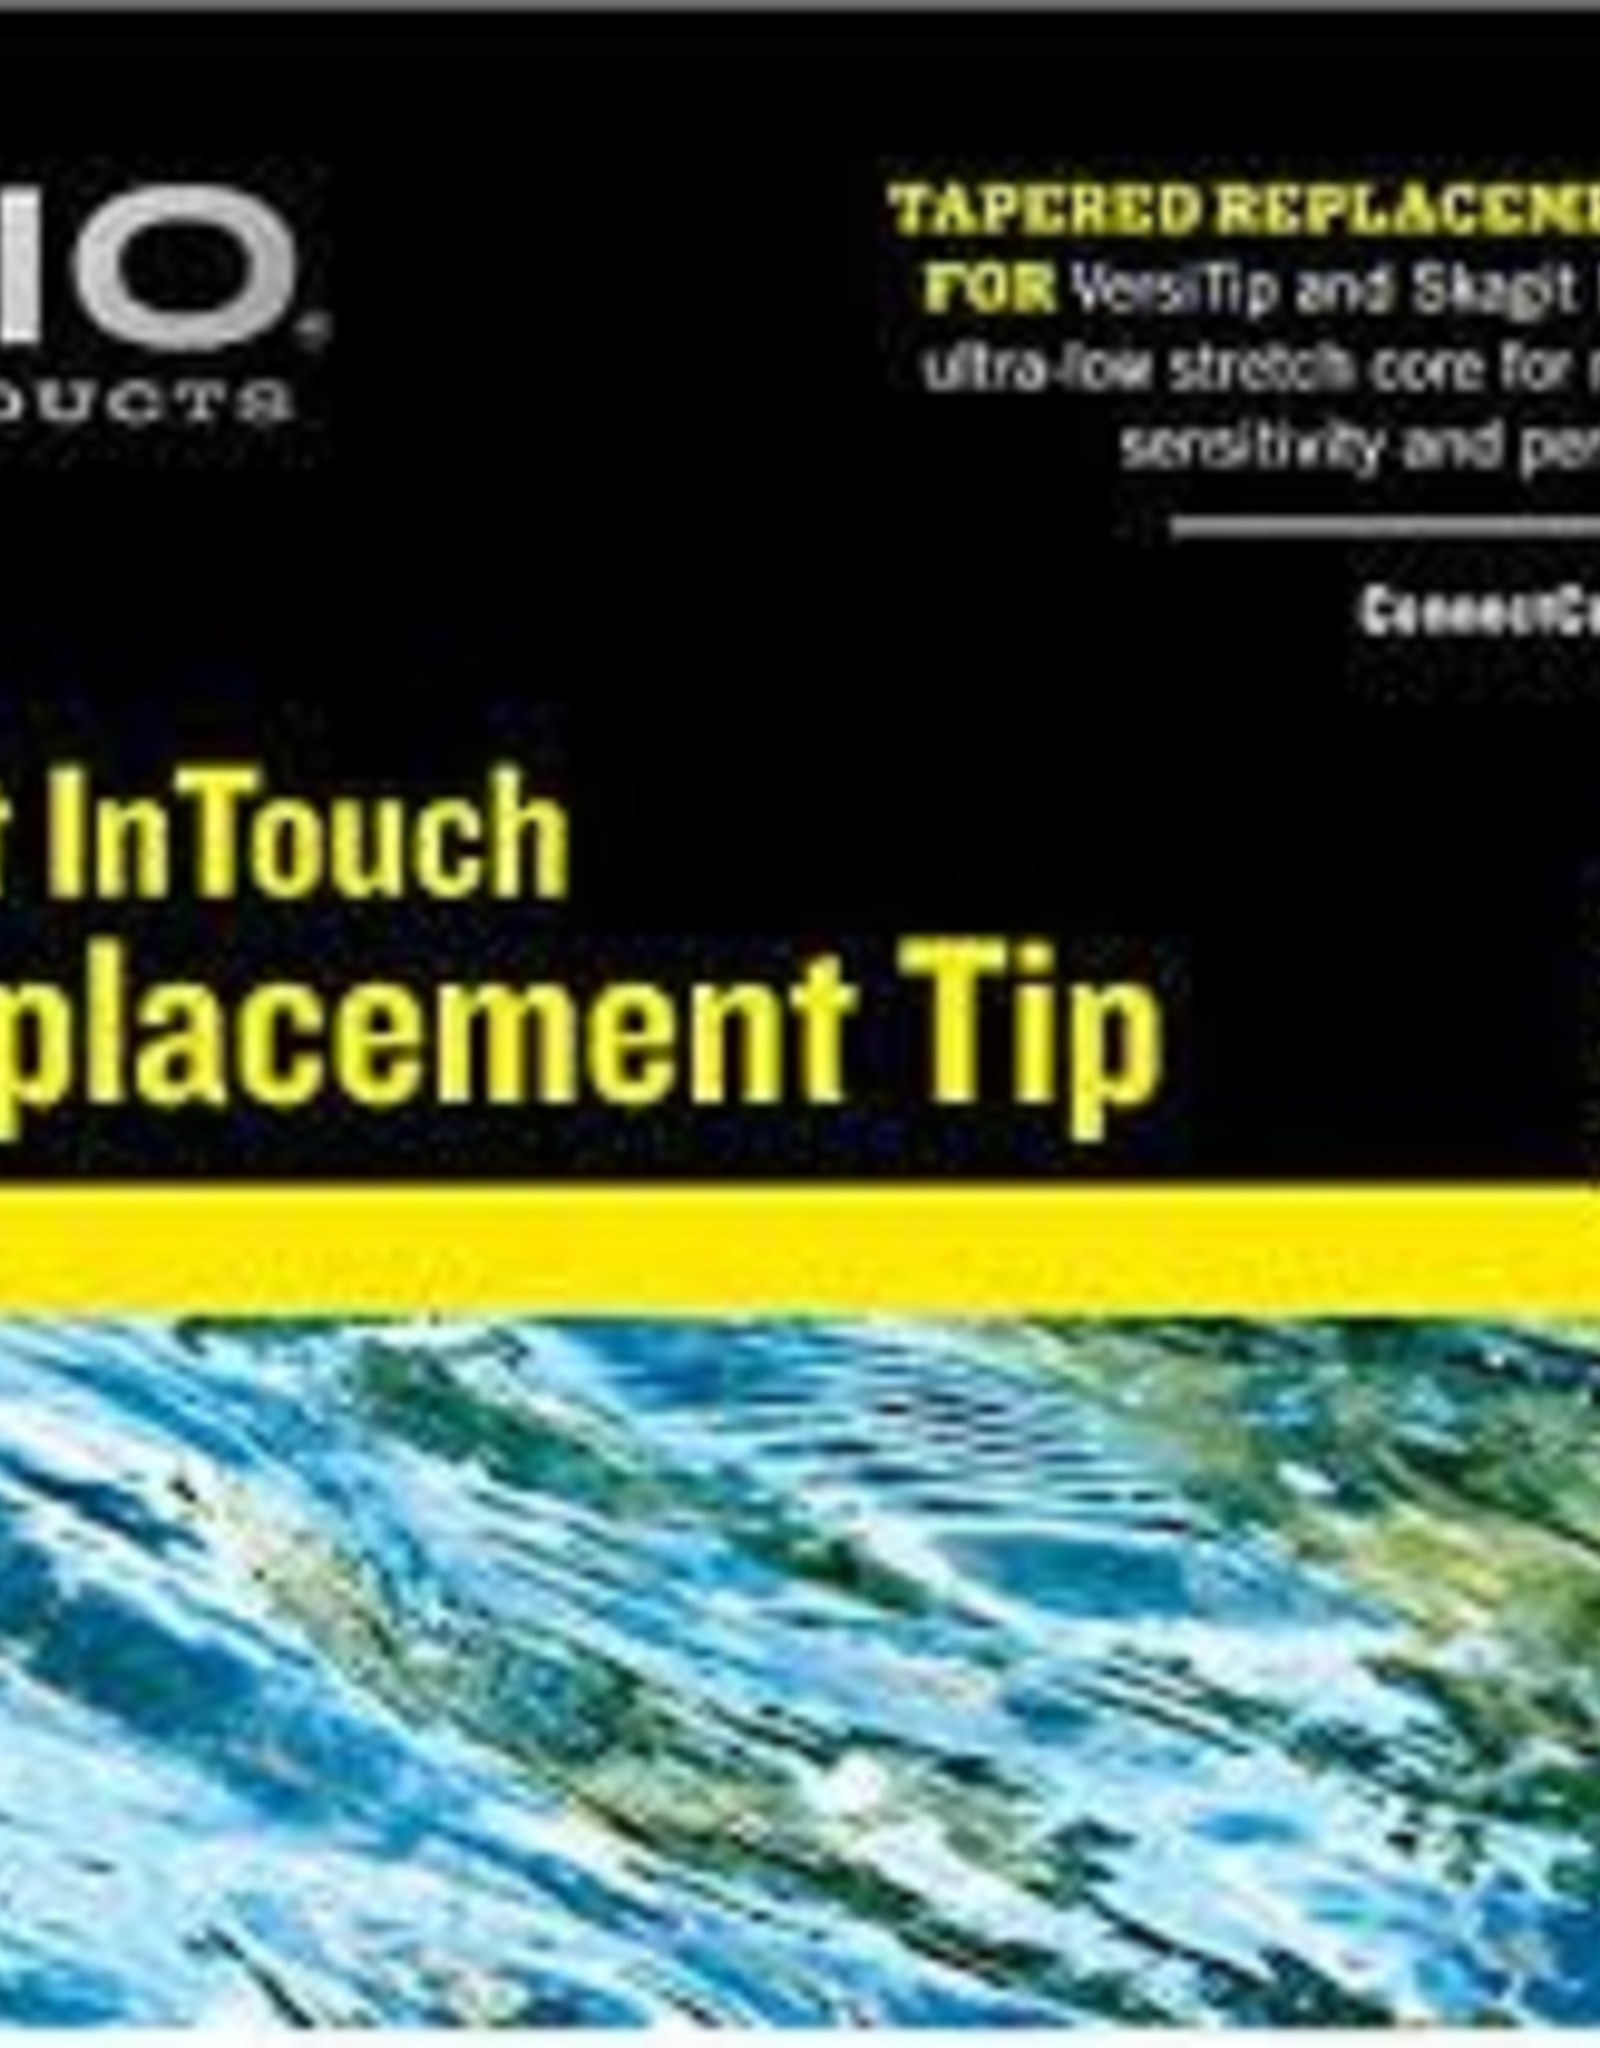 Rio 10' INTOUCH REPLACMENT TIP #8 FLT